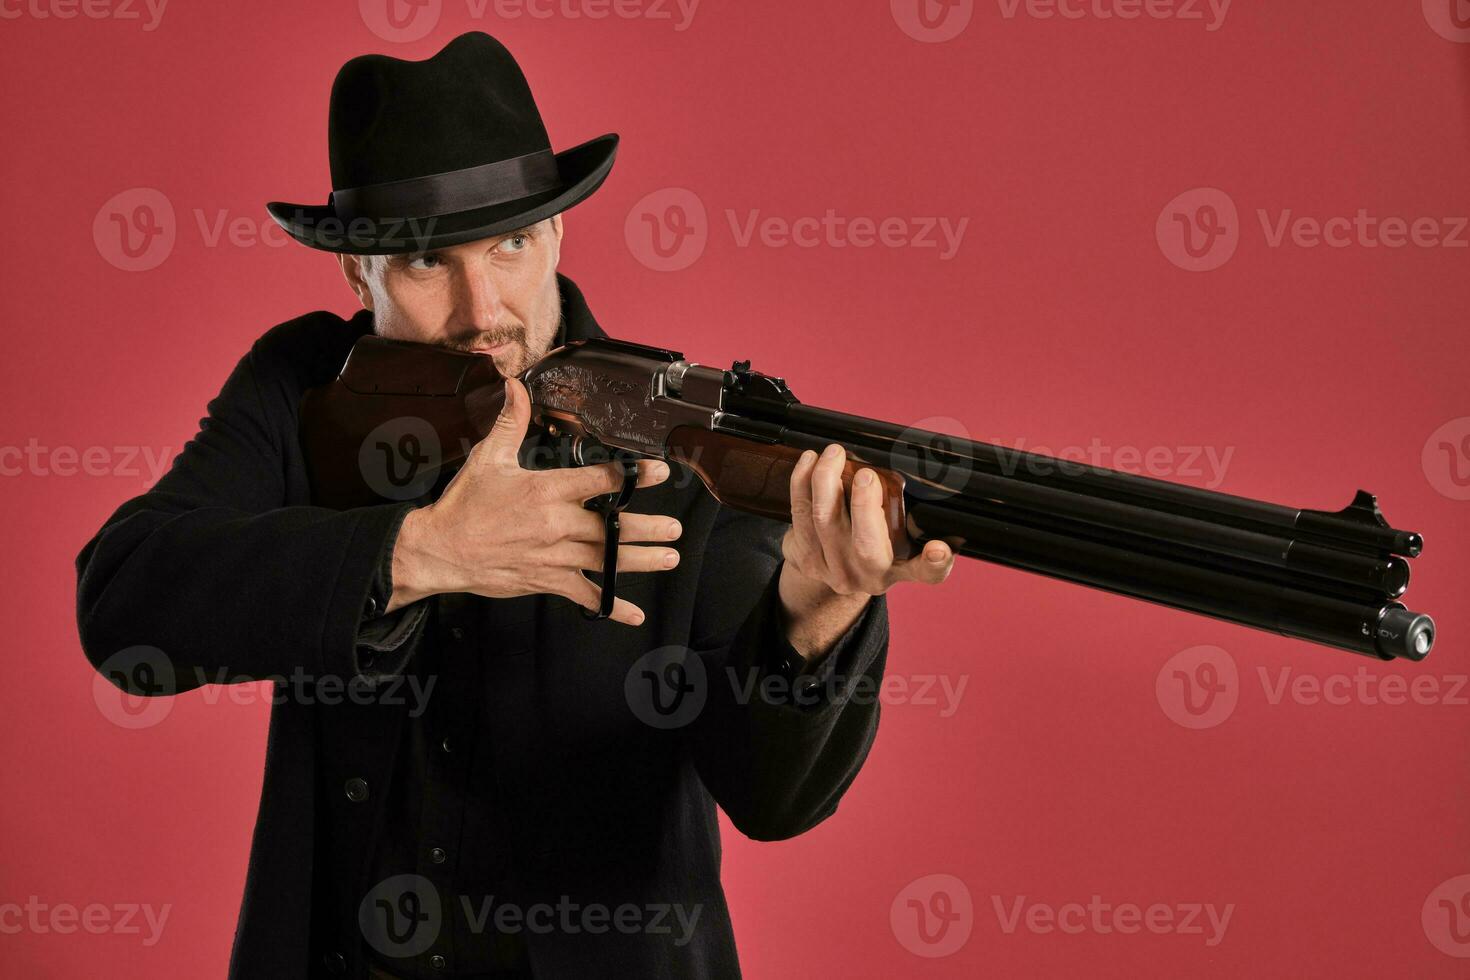 Middle-aged man with beard, mustache, in black jacket and hat, holding a gun while posing against a red background. Sincere emotions concept. photo